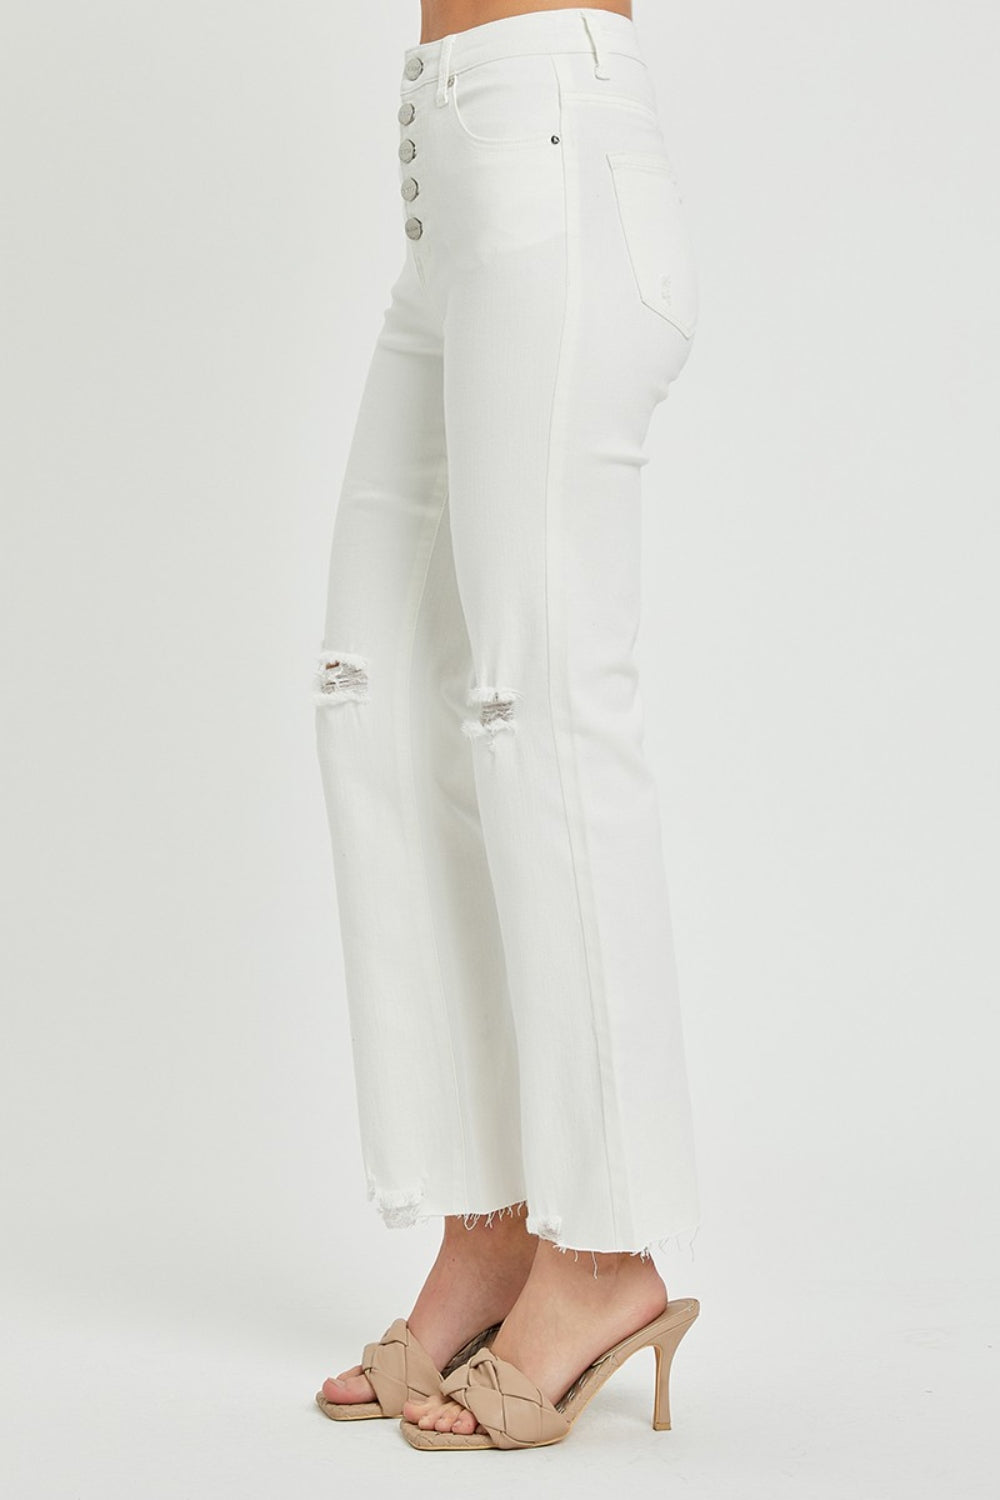 White high-waisted jeans with trendy distressed details and button fly.